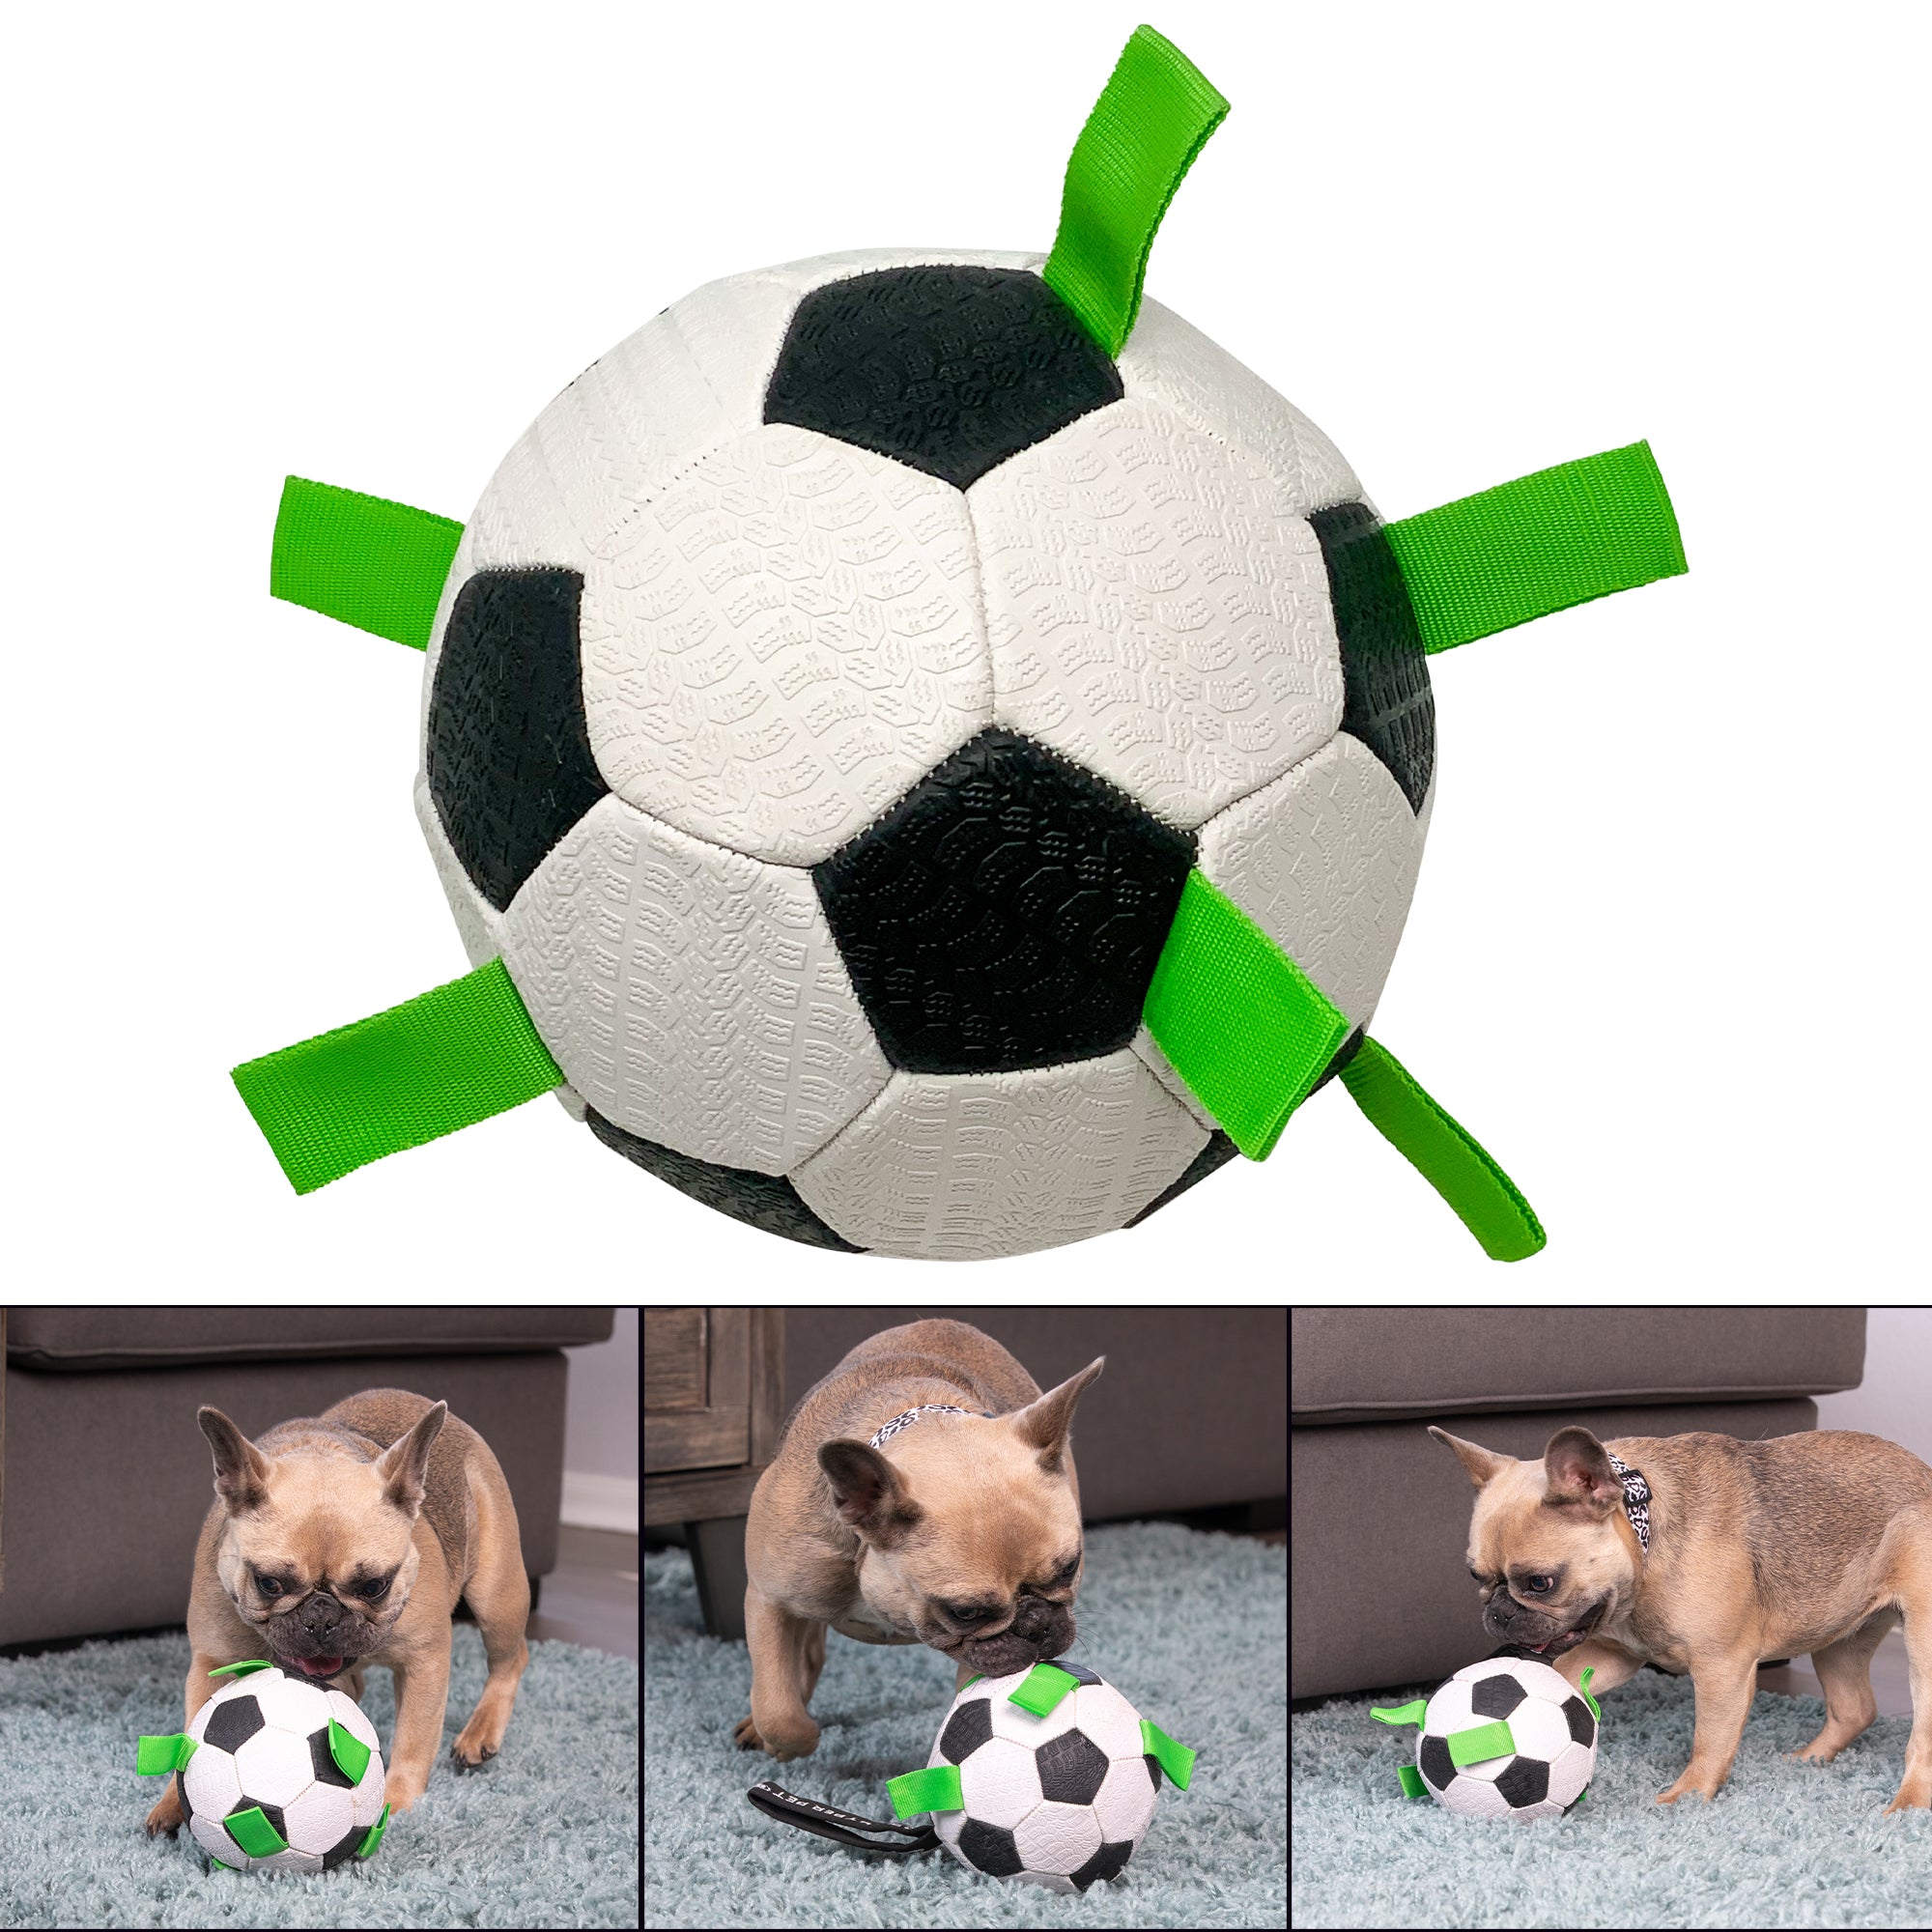 Pull Tab Durable Nylon Dog Toy - Made in the USA